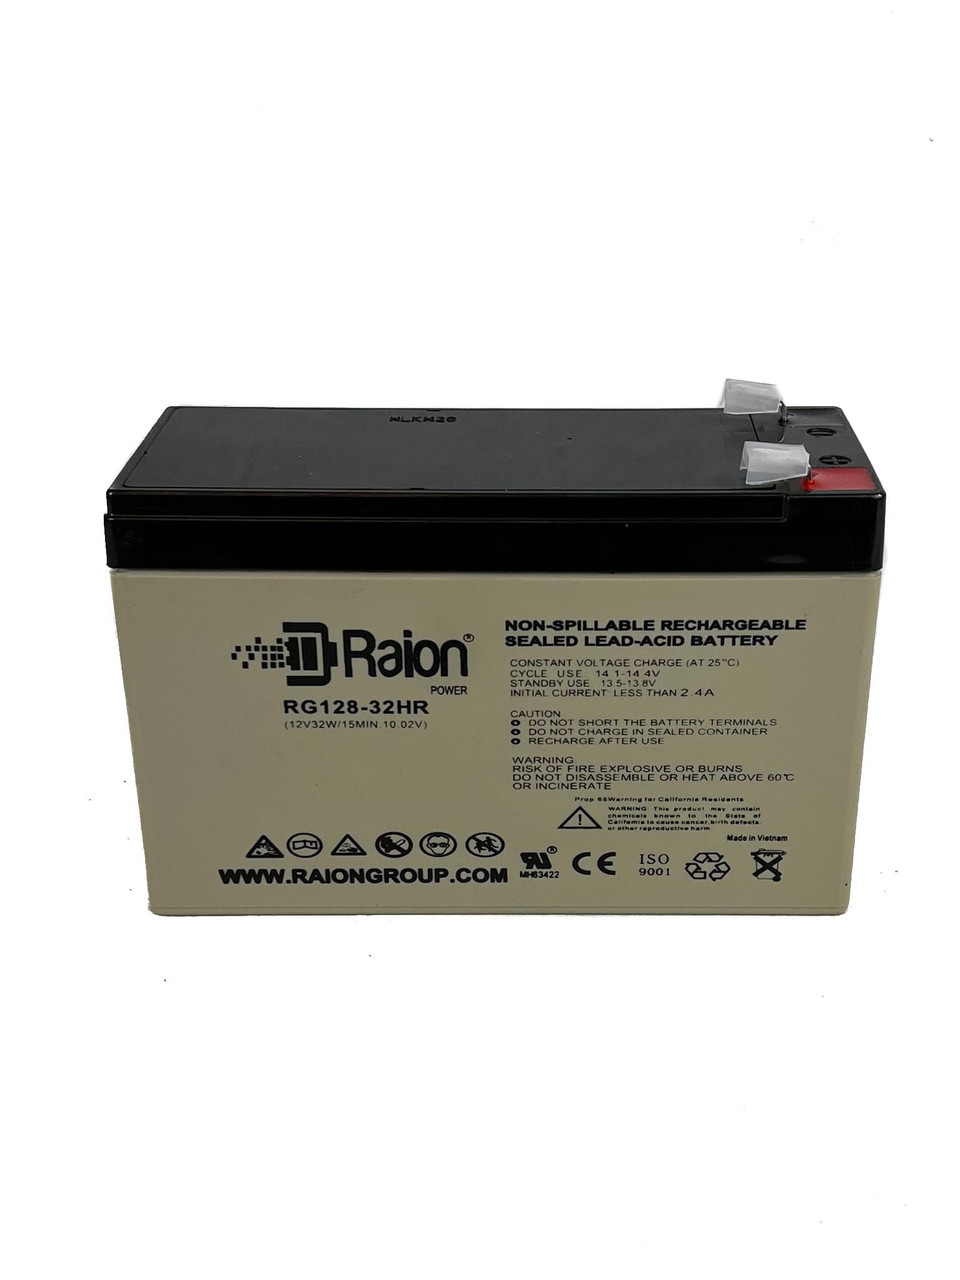 Raion Power RG128-32HR Replacement High Rate Battery Cartridge for Tripp Lite INTERNET 500i